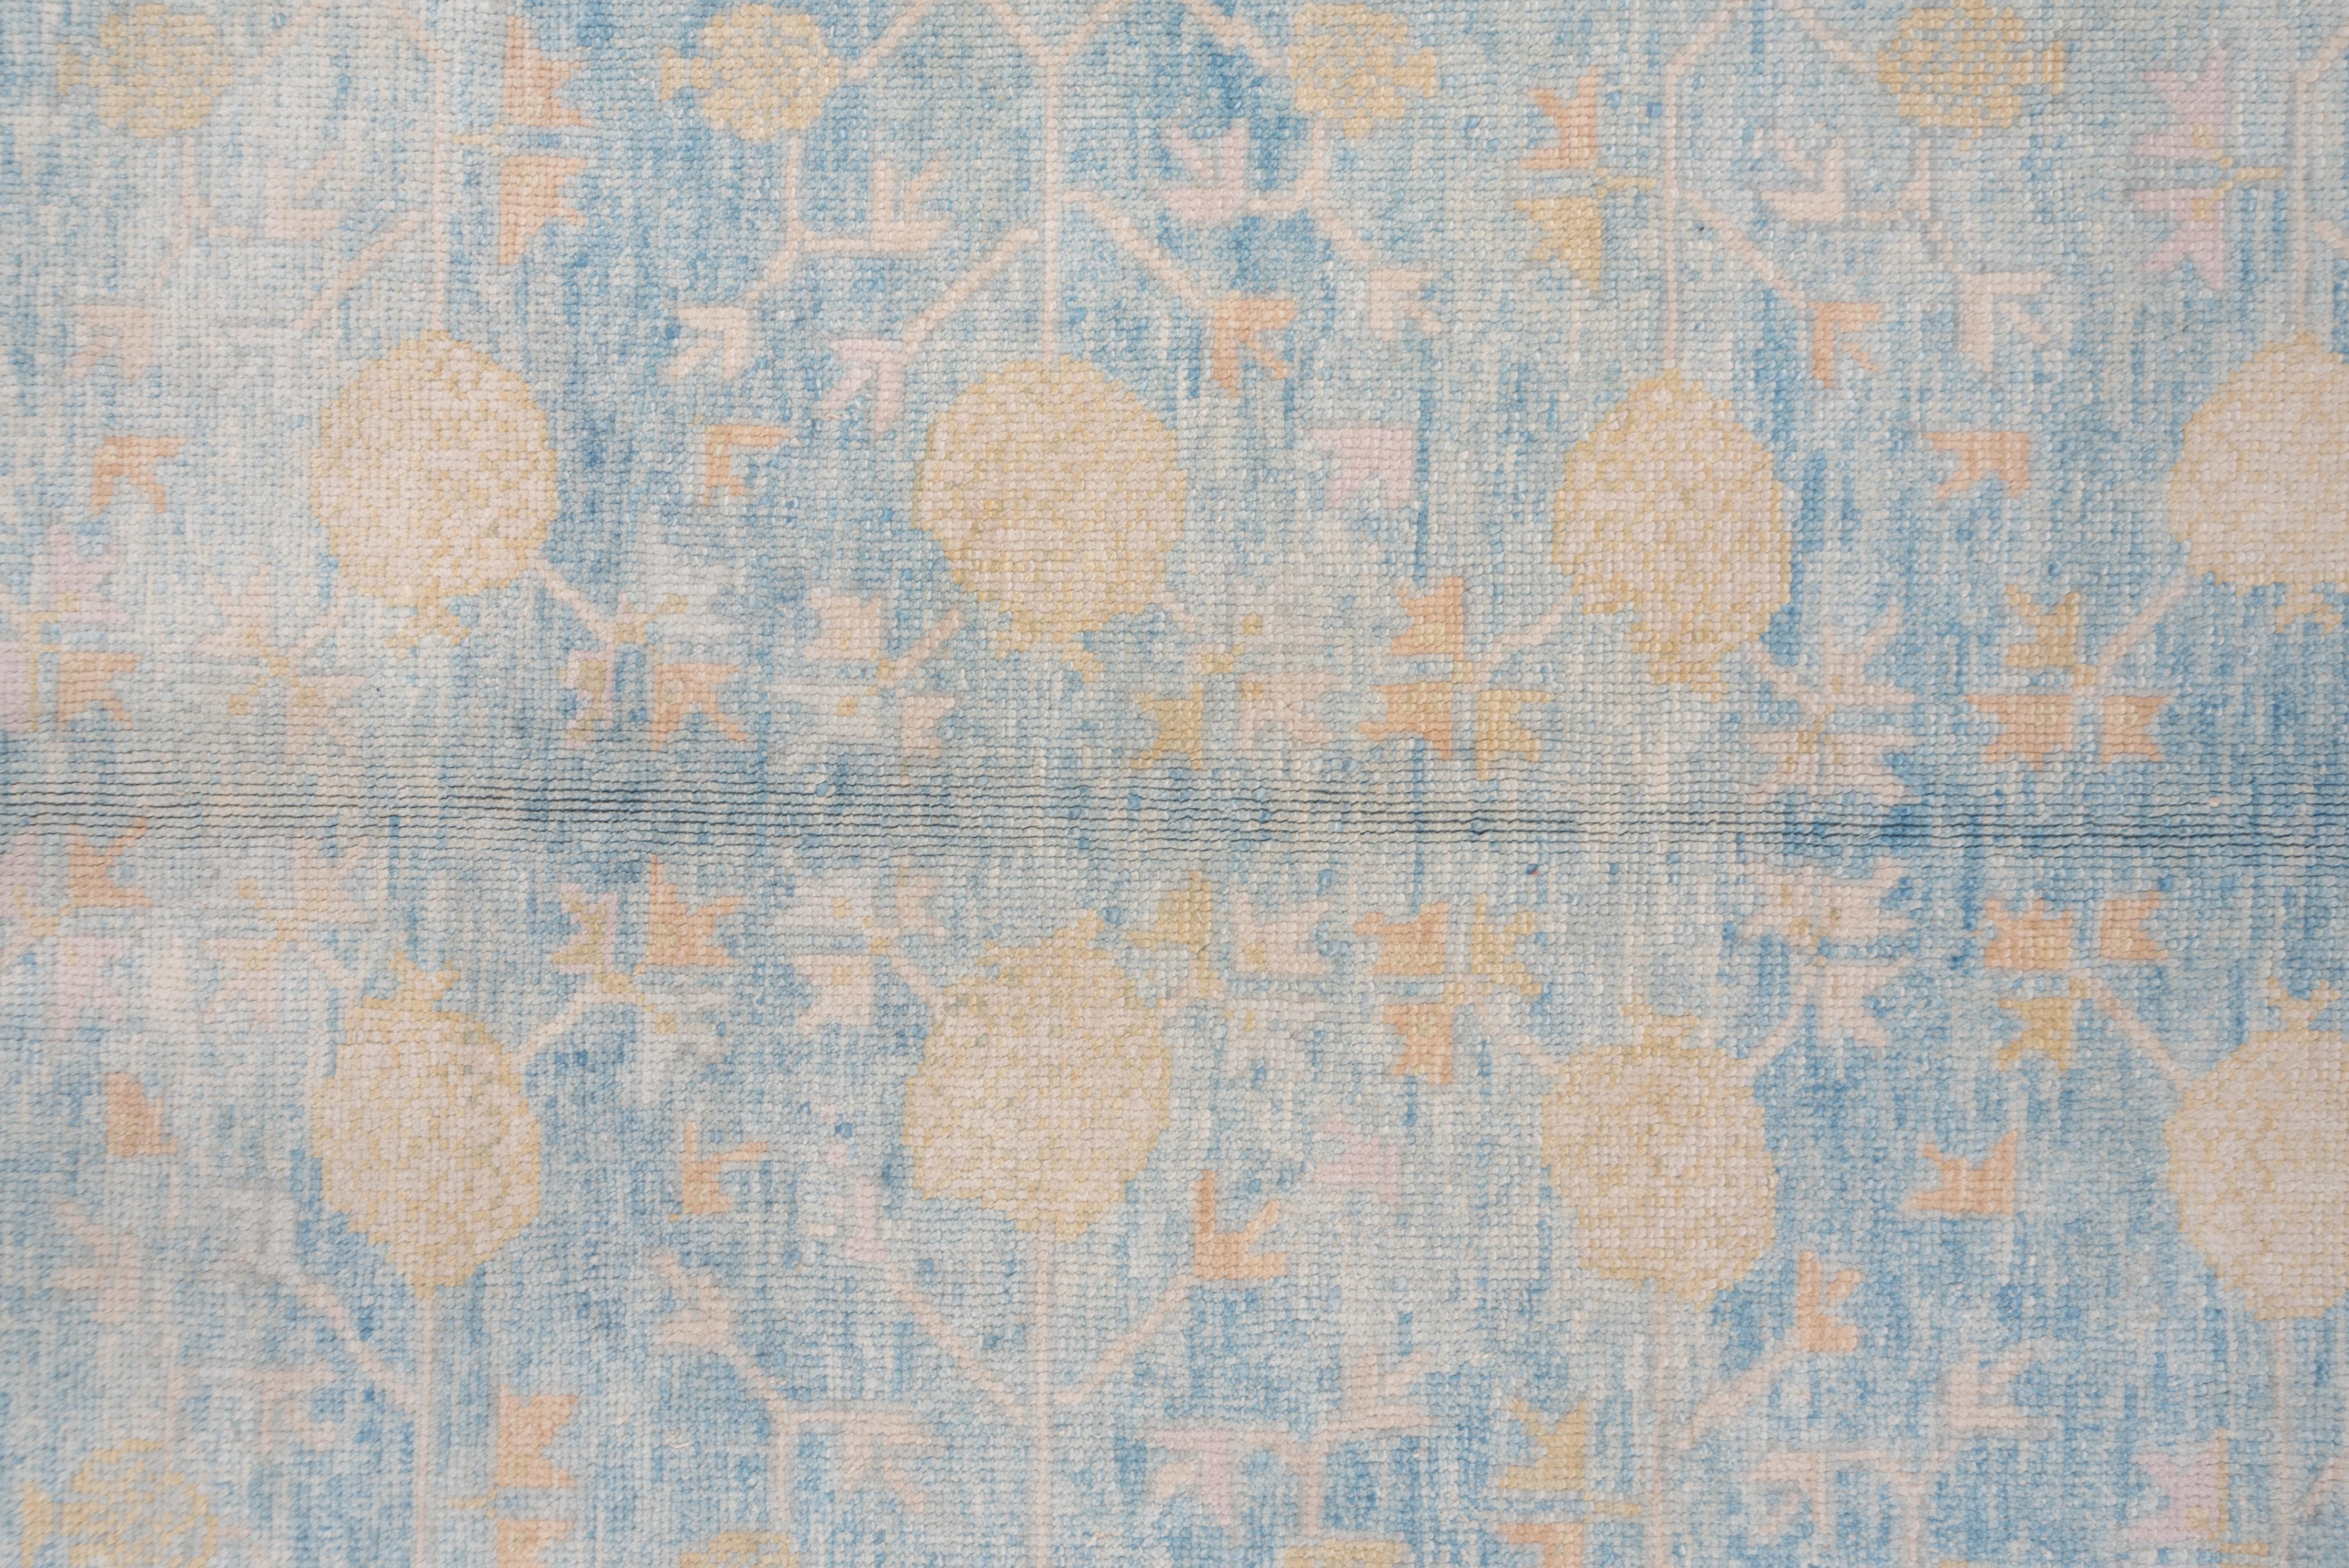 The field abrashes from powder blue to sky blue while showing an all-over elliptical palmette and open diamond design with straw details. Sand and ivory border with a floral reciprocal pattern.